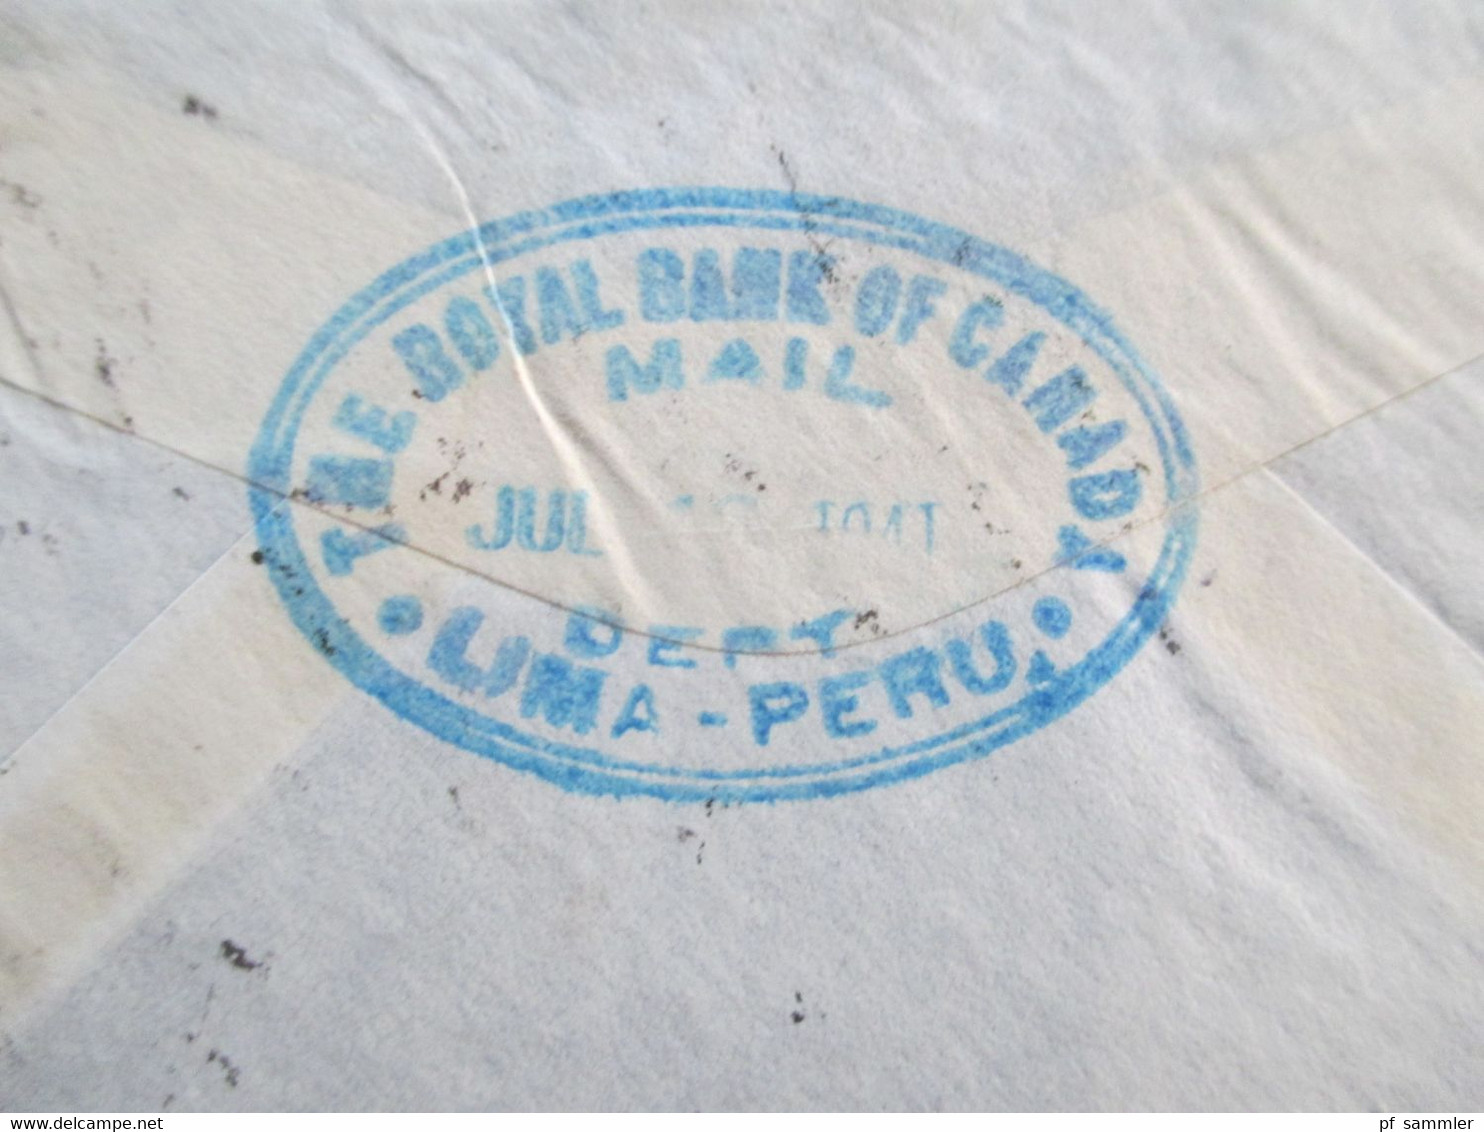 Peru 1941 Air Mail The Royal Bank Of Canada At Point Of Mailing Lima Peru - Rockefeller Center New York - Perú